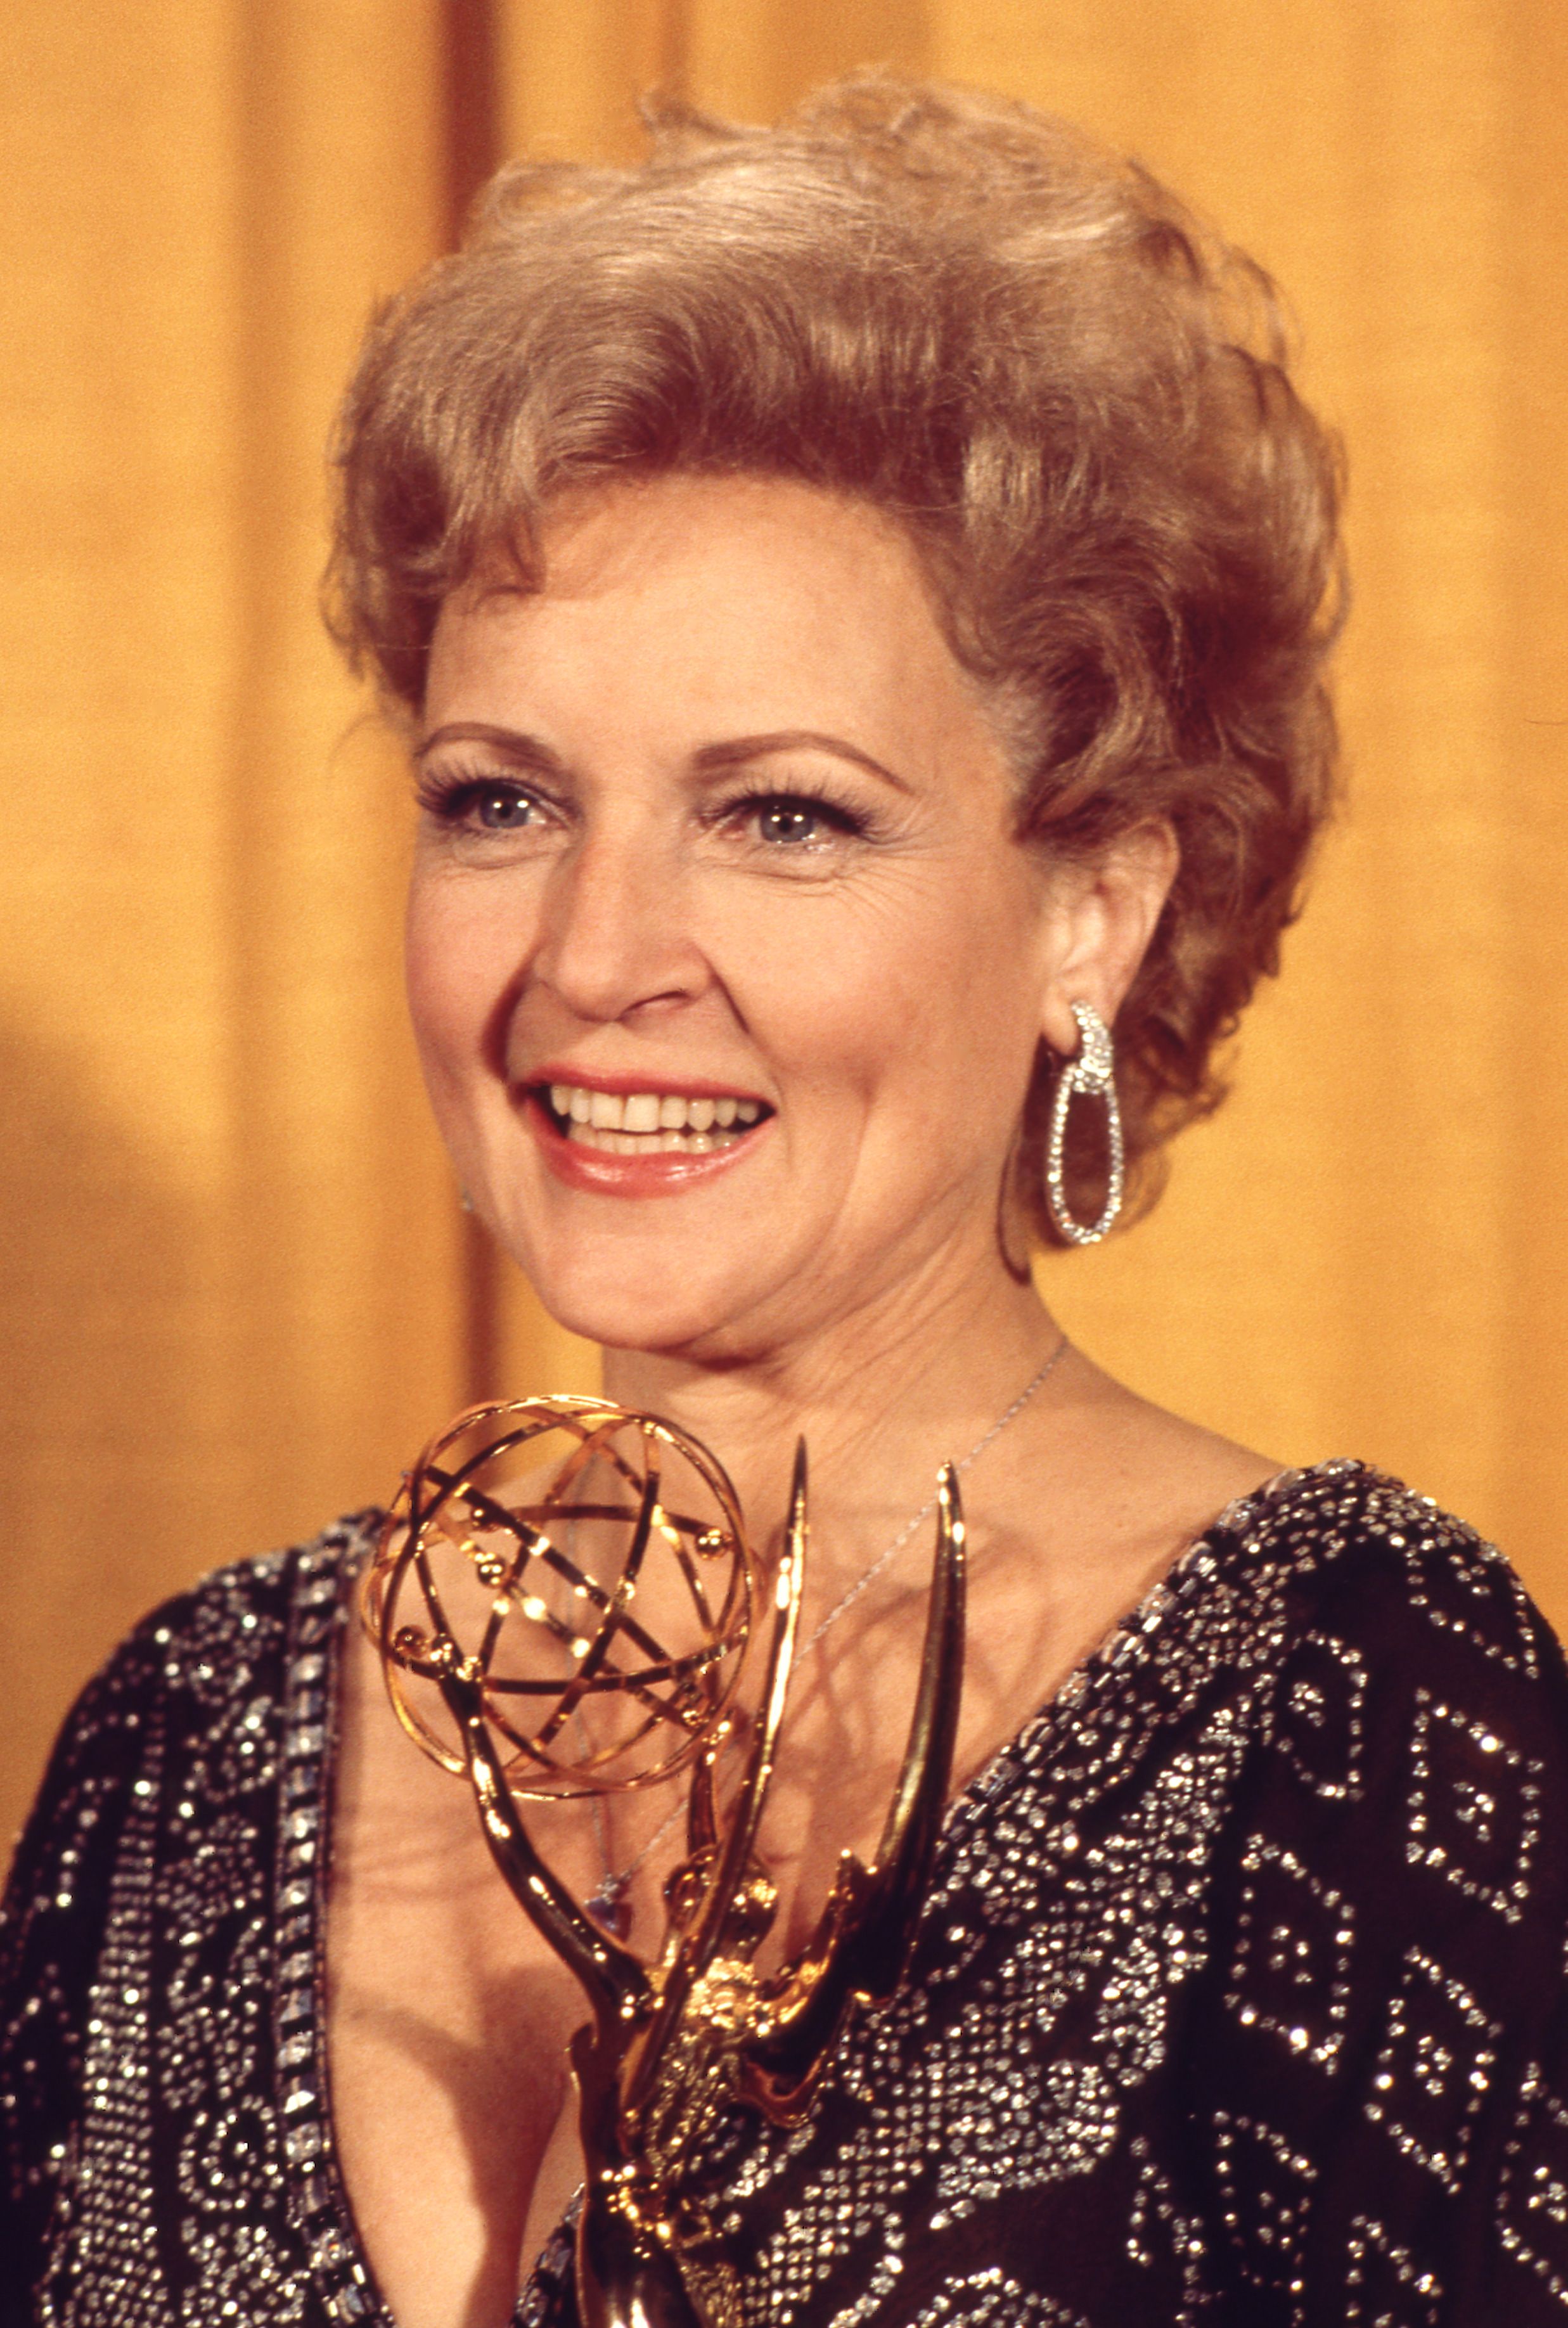 betty-white-holding-her-emmy-award-in-the-press-room-at-the-news-photo-1578775560.jpg